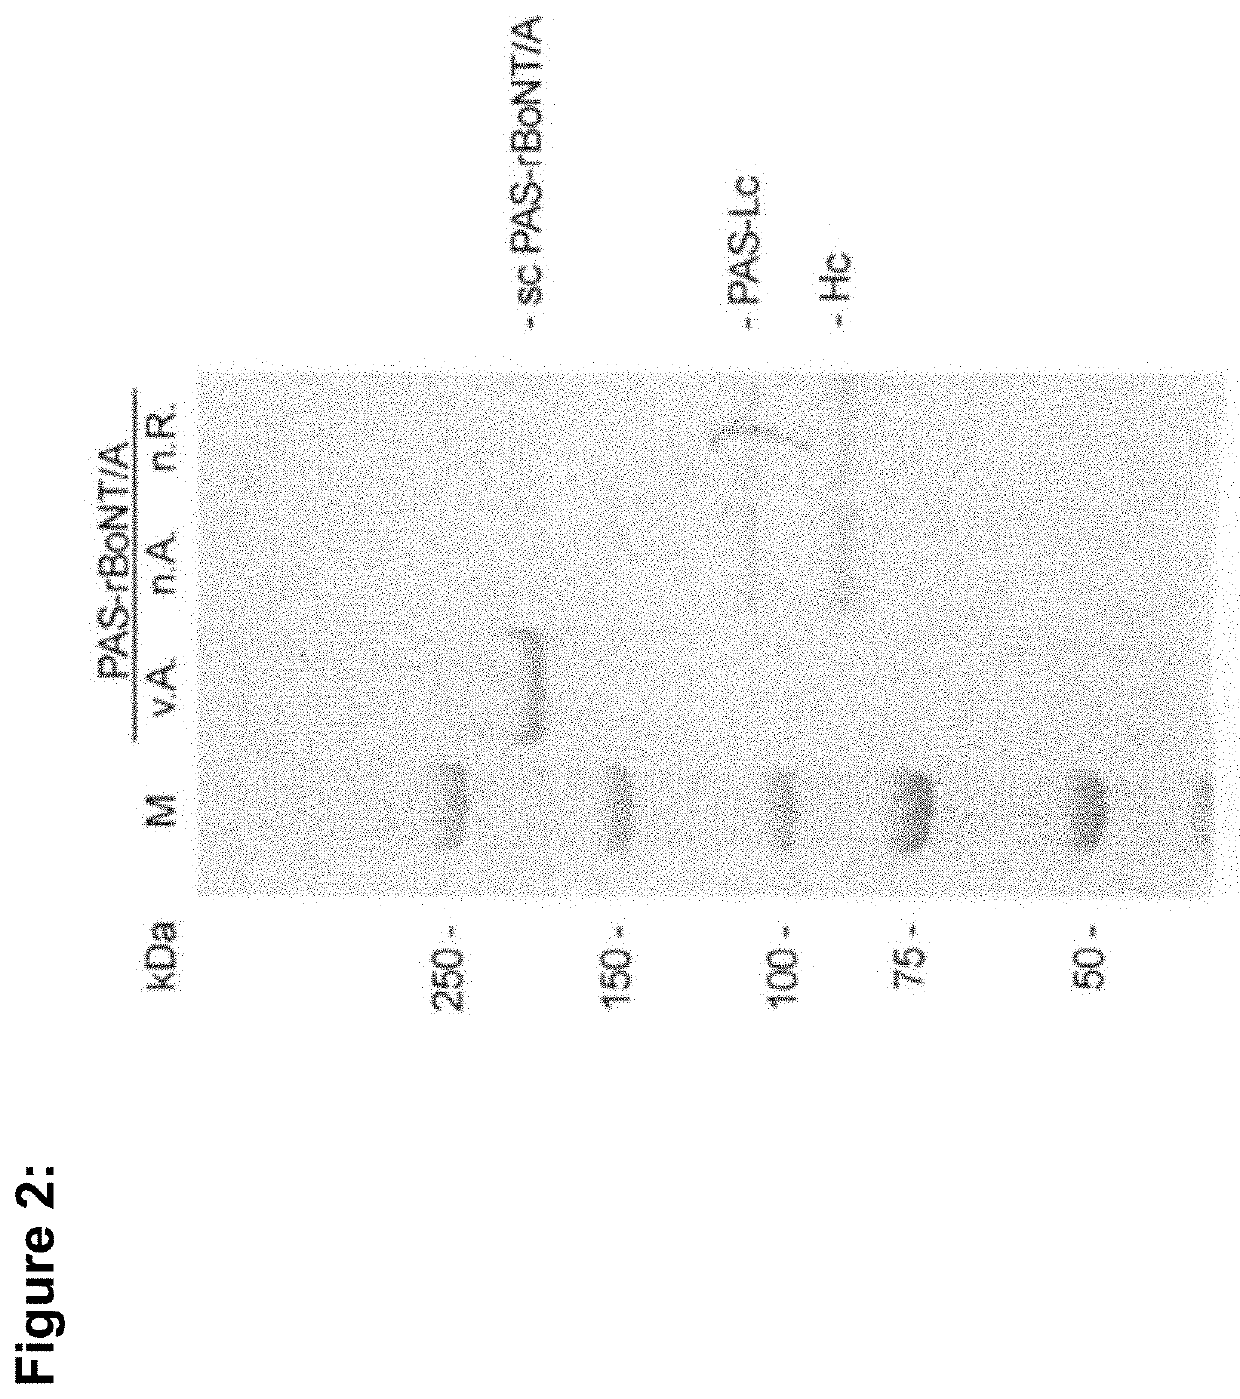 Recombinant clostridial neurotoxins with increased duration of effect